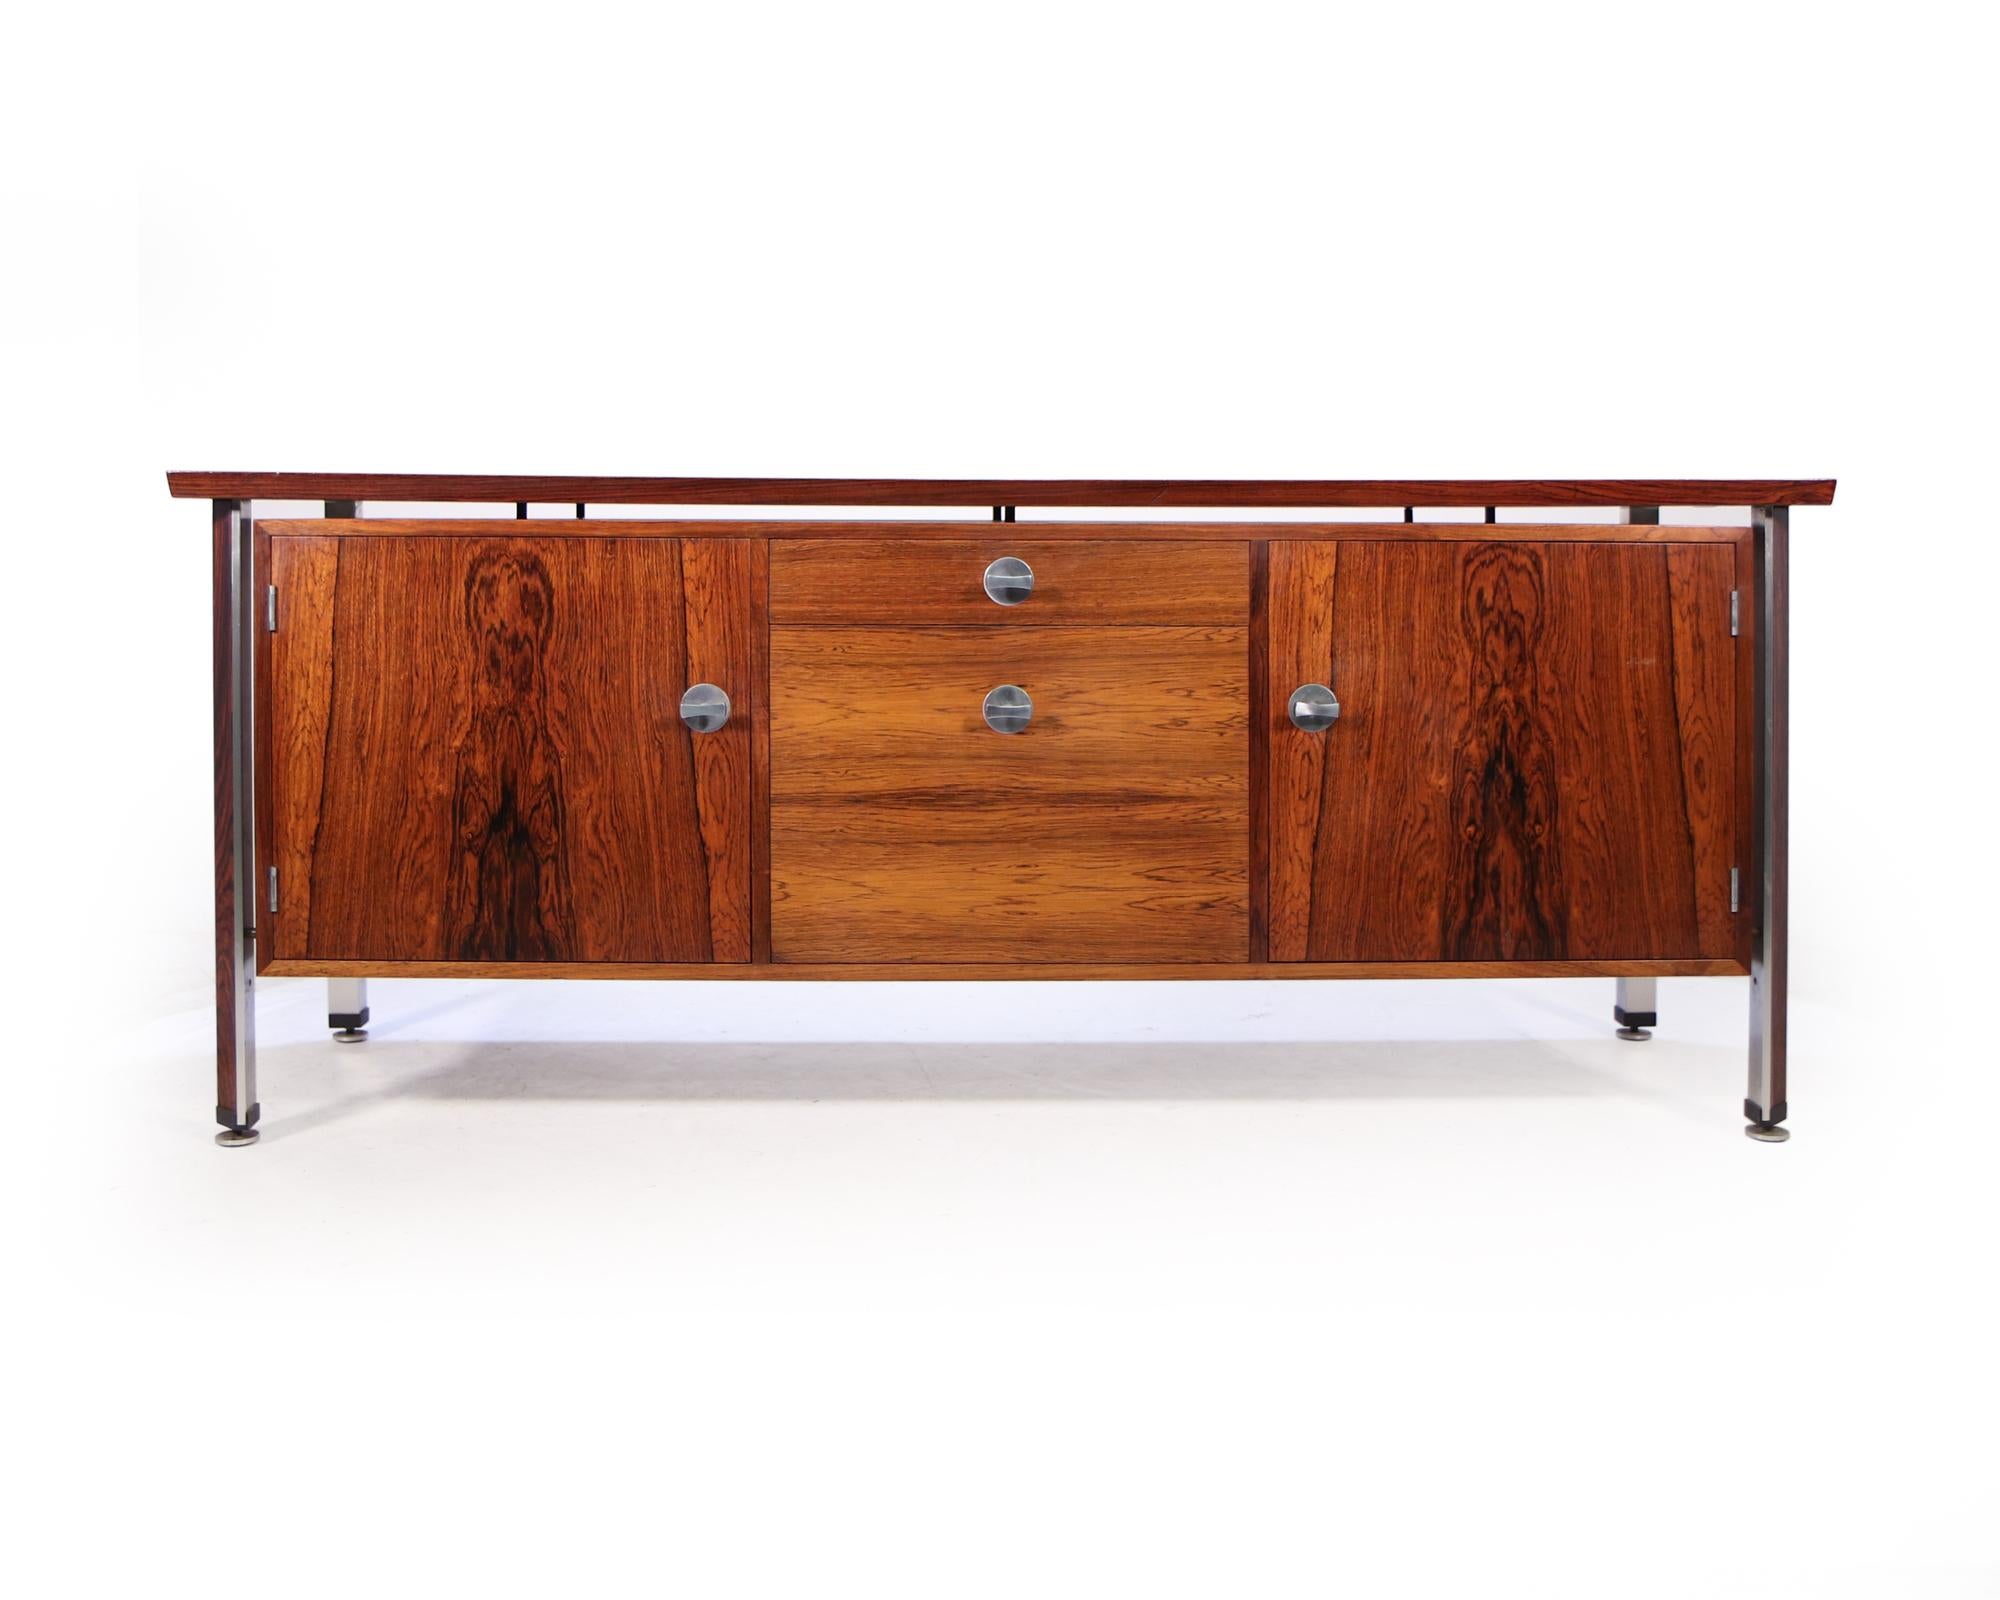 A mid century rosewood sideboard part of the Diplomat range designed by Finn Juhl, produced by France and Son in Denmark in the mid 1960’s , the sideboard has two central drawers and two doors with adjustable shelves behind. The wood inlaid aluminum